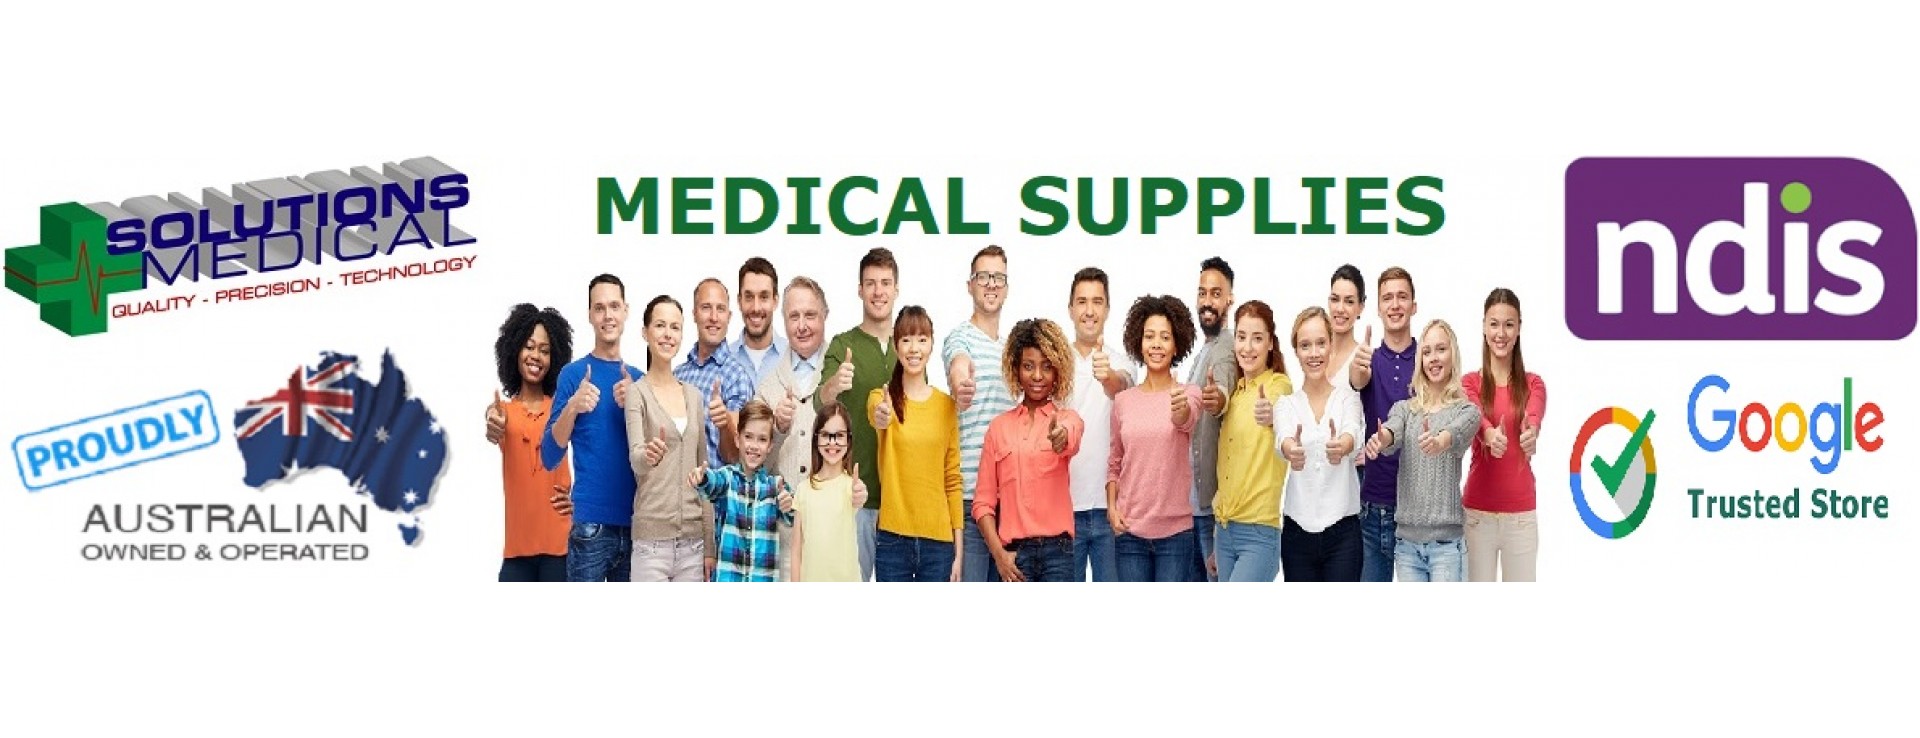 Solutions Medical Healthcare